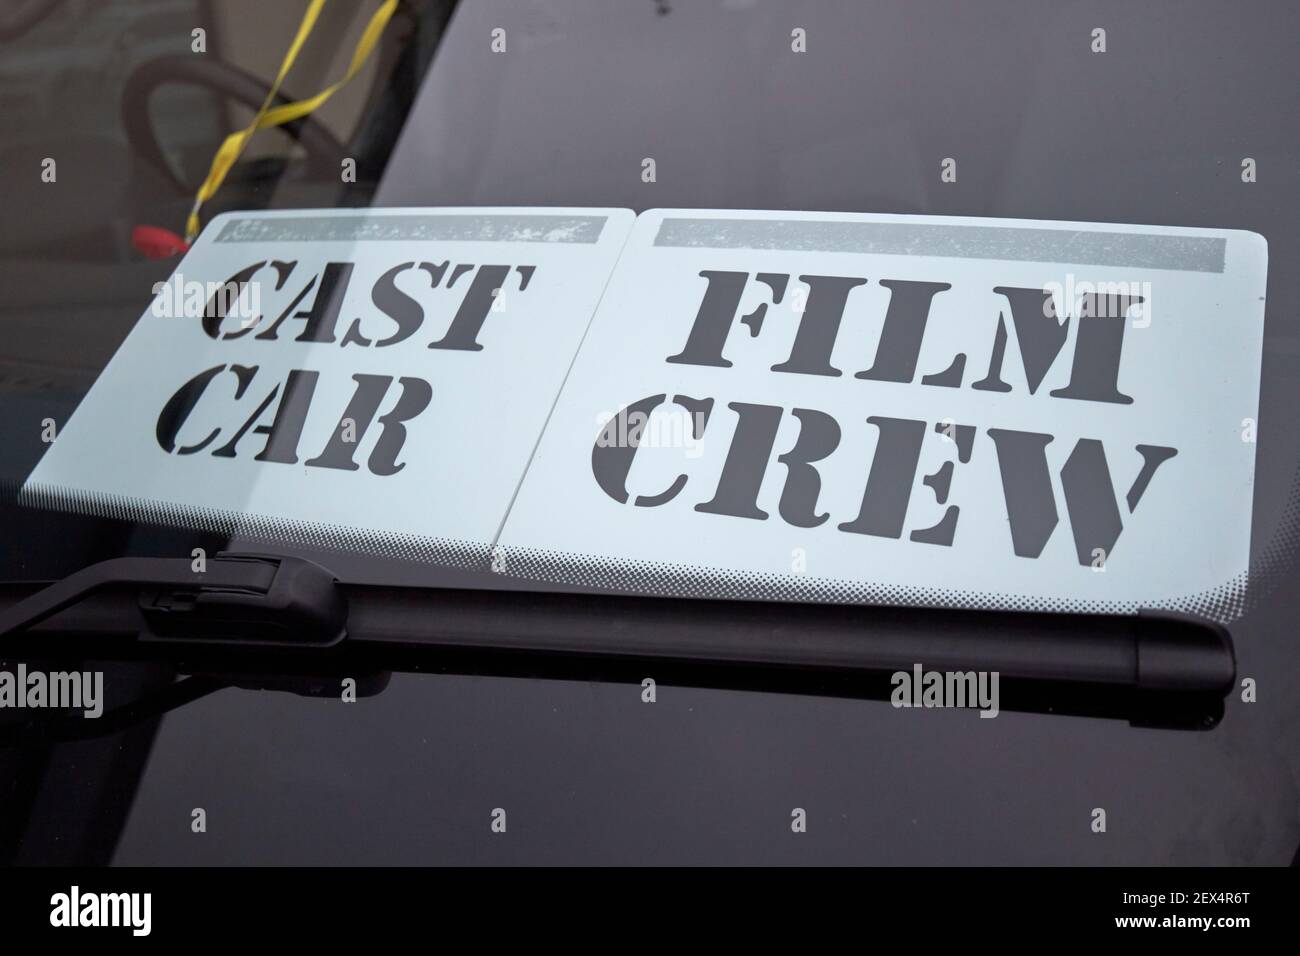 label in vehicle window indicating it is a cast car for film crew filming a movie in northern ireland Stock Photo